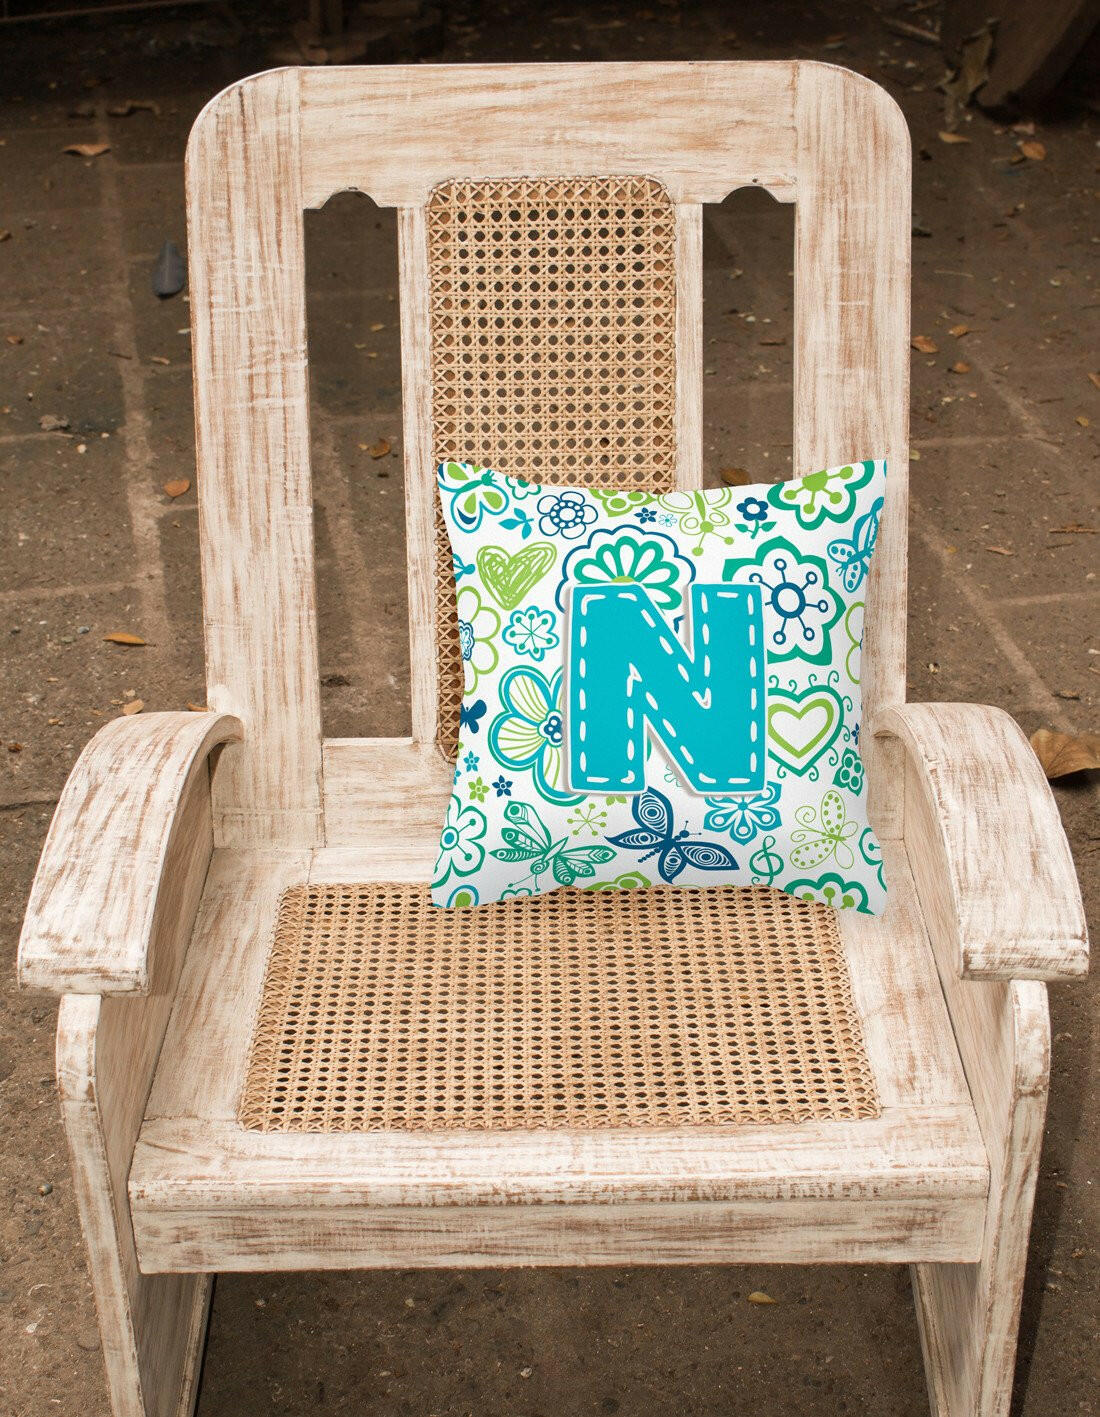 Letter N Flowers and Butterflies Teal Blue Canvas Fabric Decorative Pillow CJ2006-NPW1414 by Caroline's Treasures